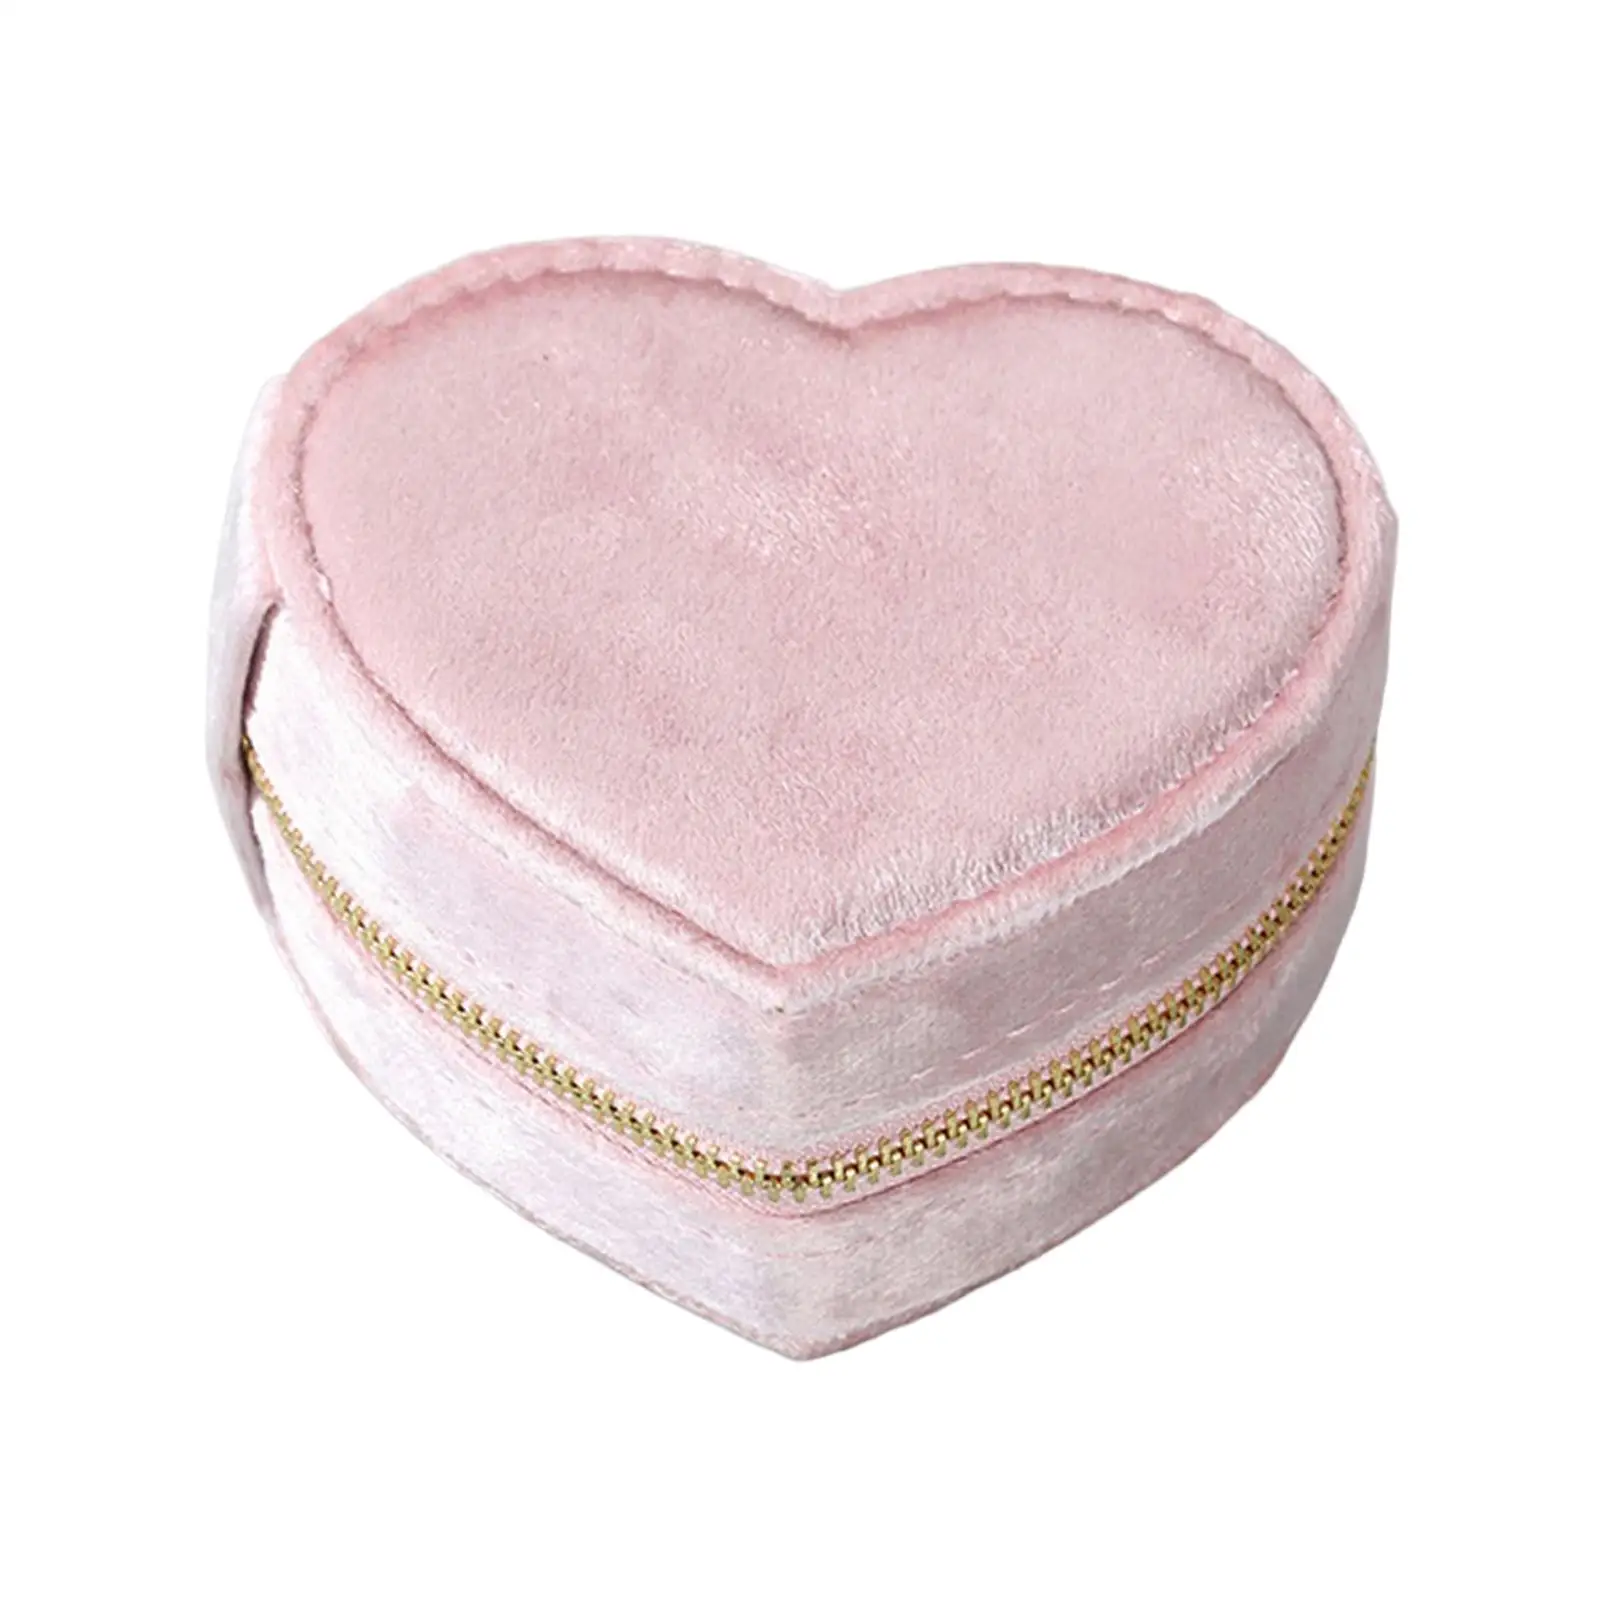 Cute Small Jewelry Box Display Storage Holder Box for Necklaces Ear Stud Pendants